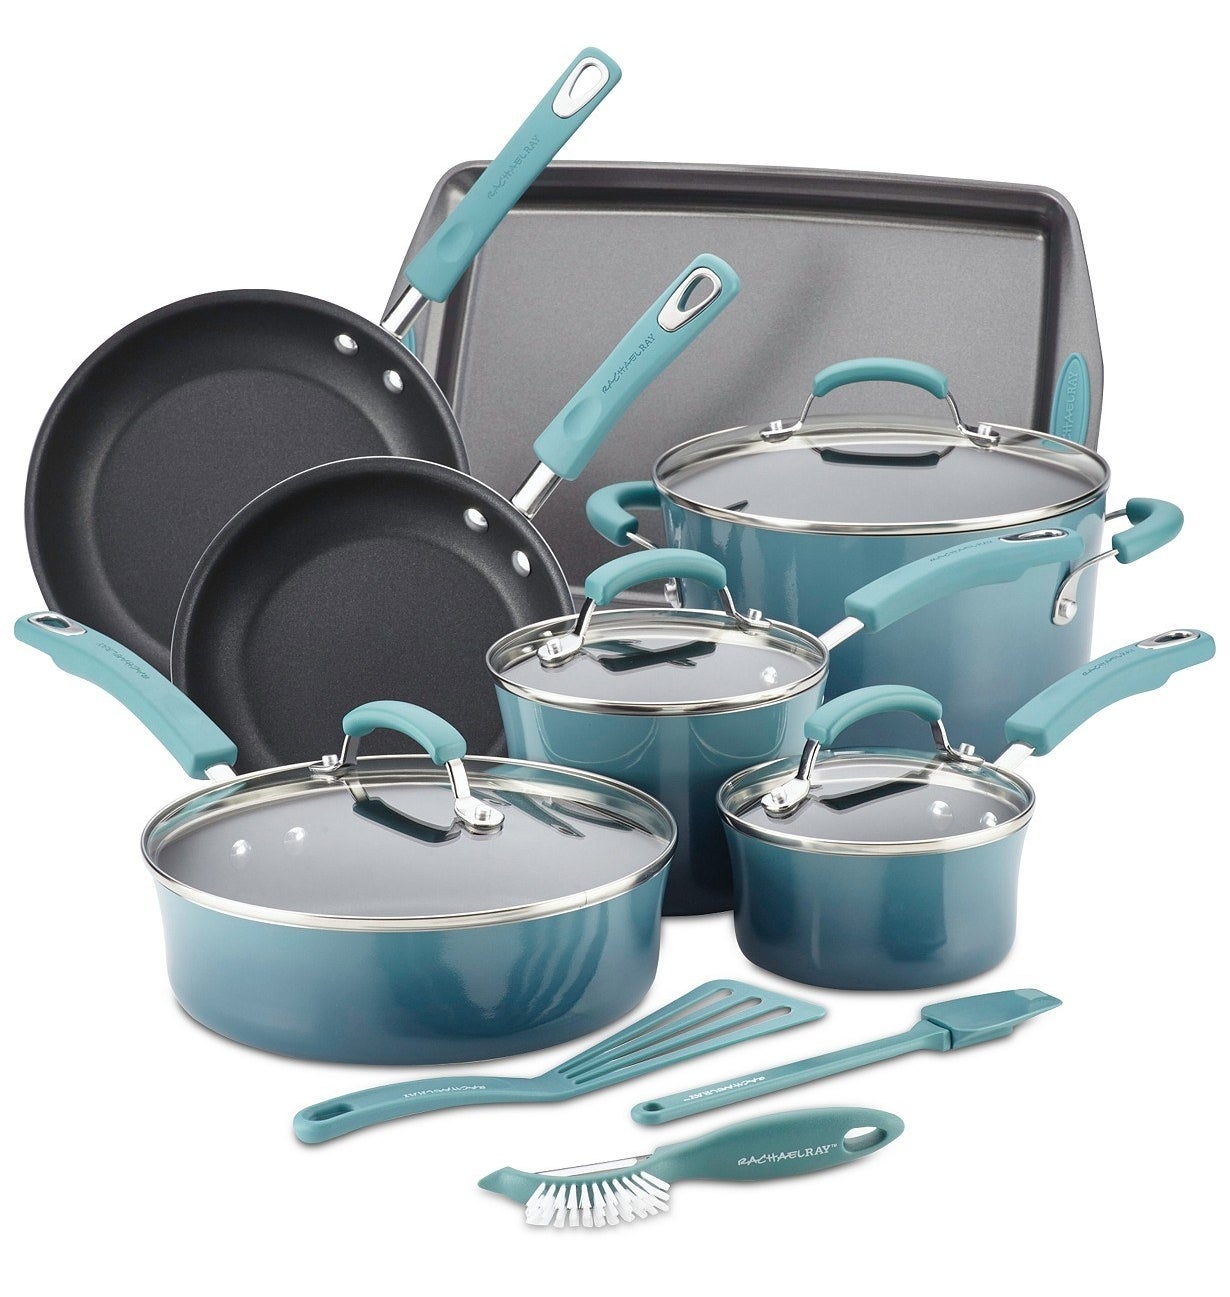 14 piece set with pots pans and utensils all in blue